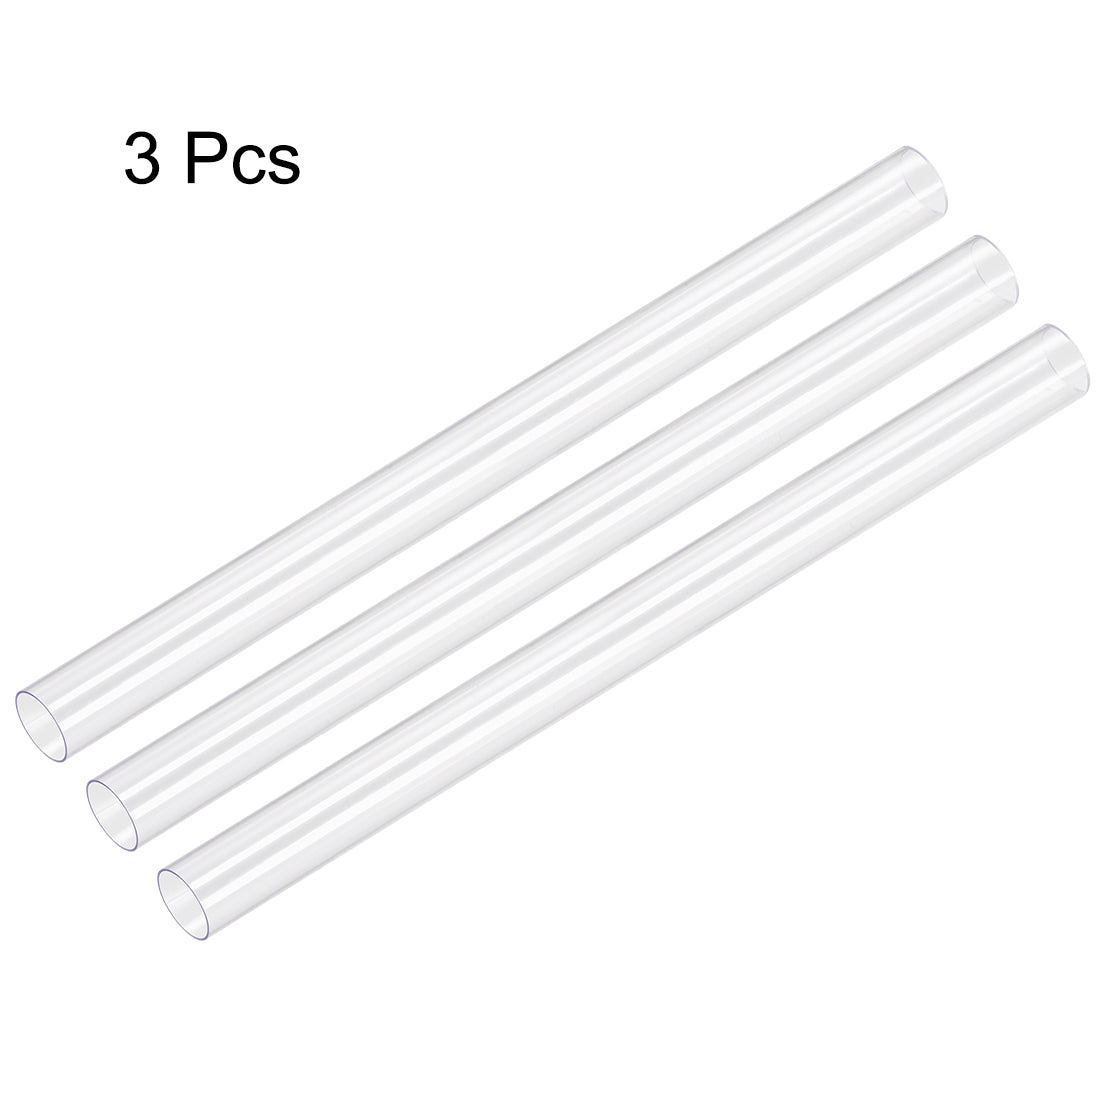 uxcell Uxcell PVC Rigid Round Tubing,Clear,30mm ID x 32mm OD,0.5M/1.64Ft Length,3pcs